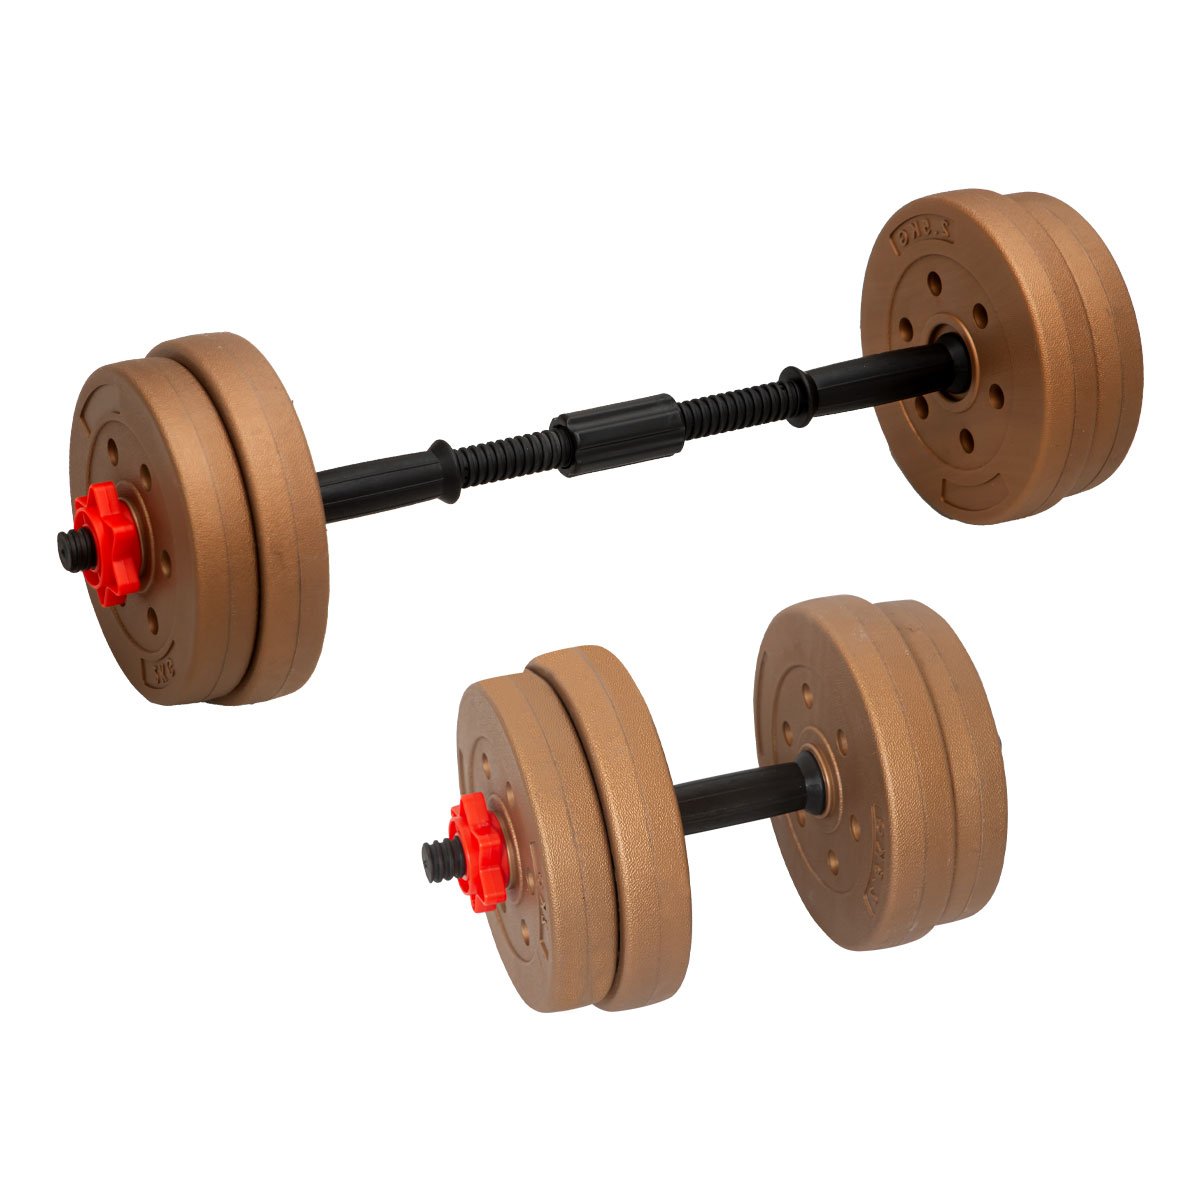 Powertrain 20kg Home Gym Adjustable Dumbbell and Barbell Weights Set - Gold 1